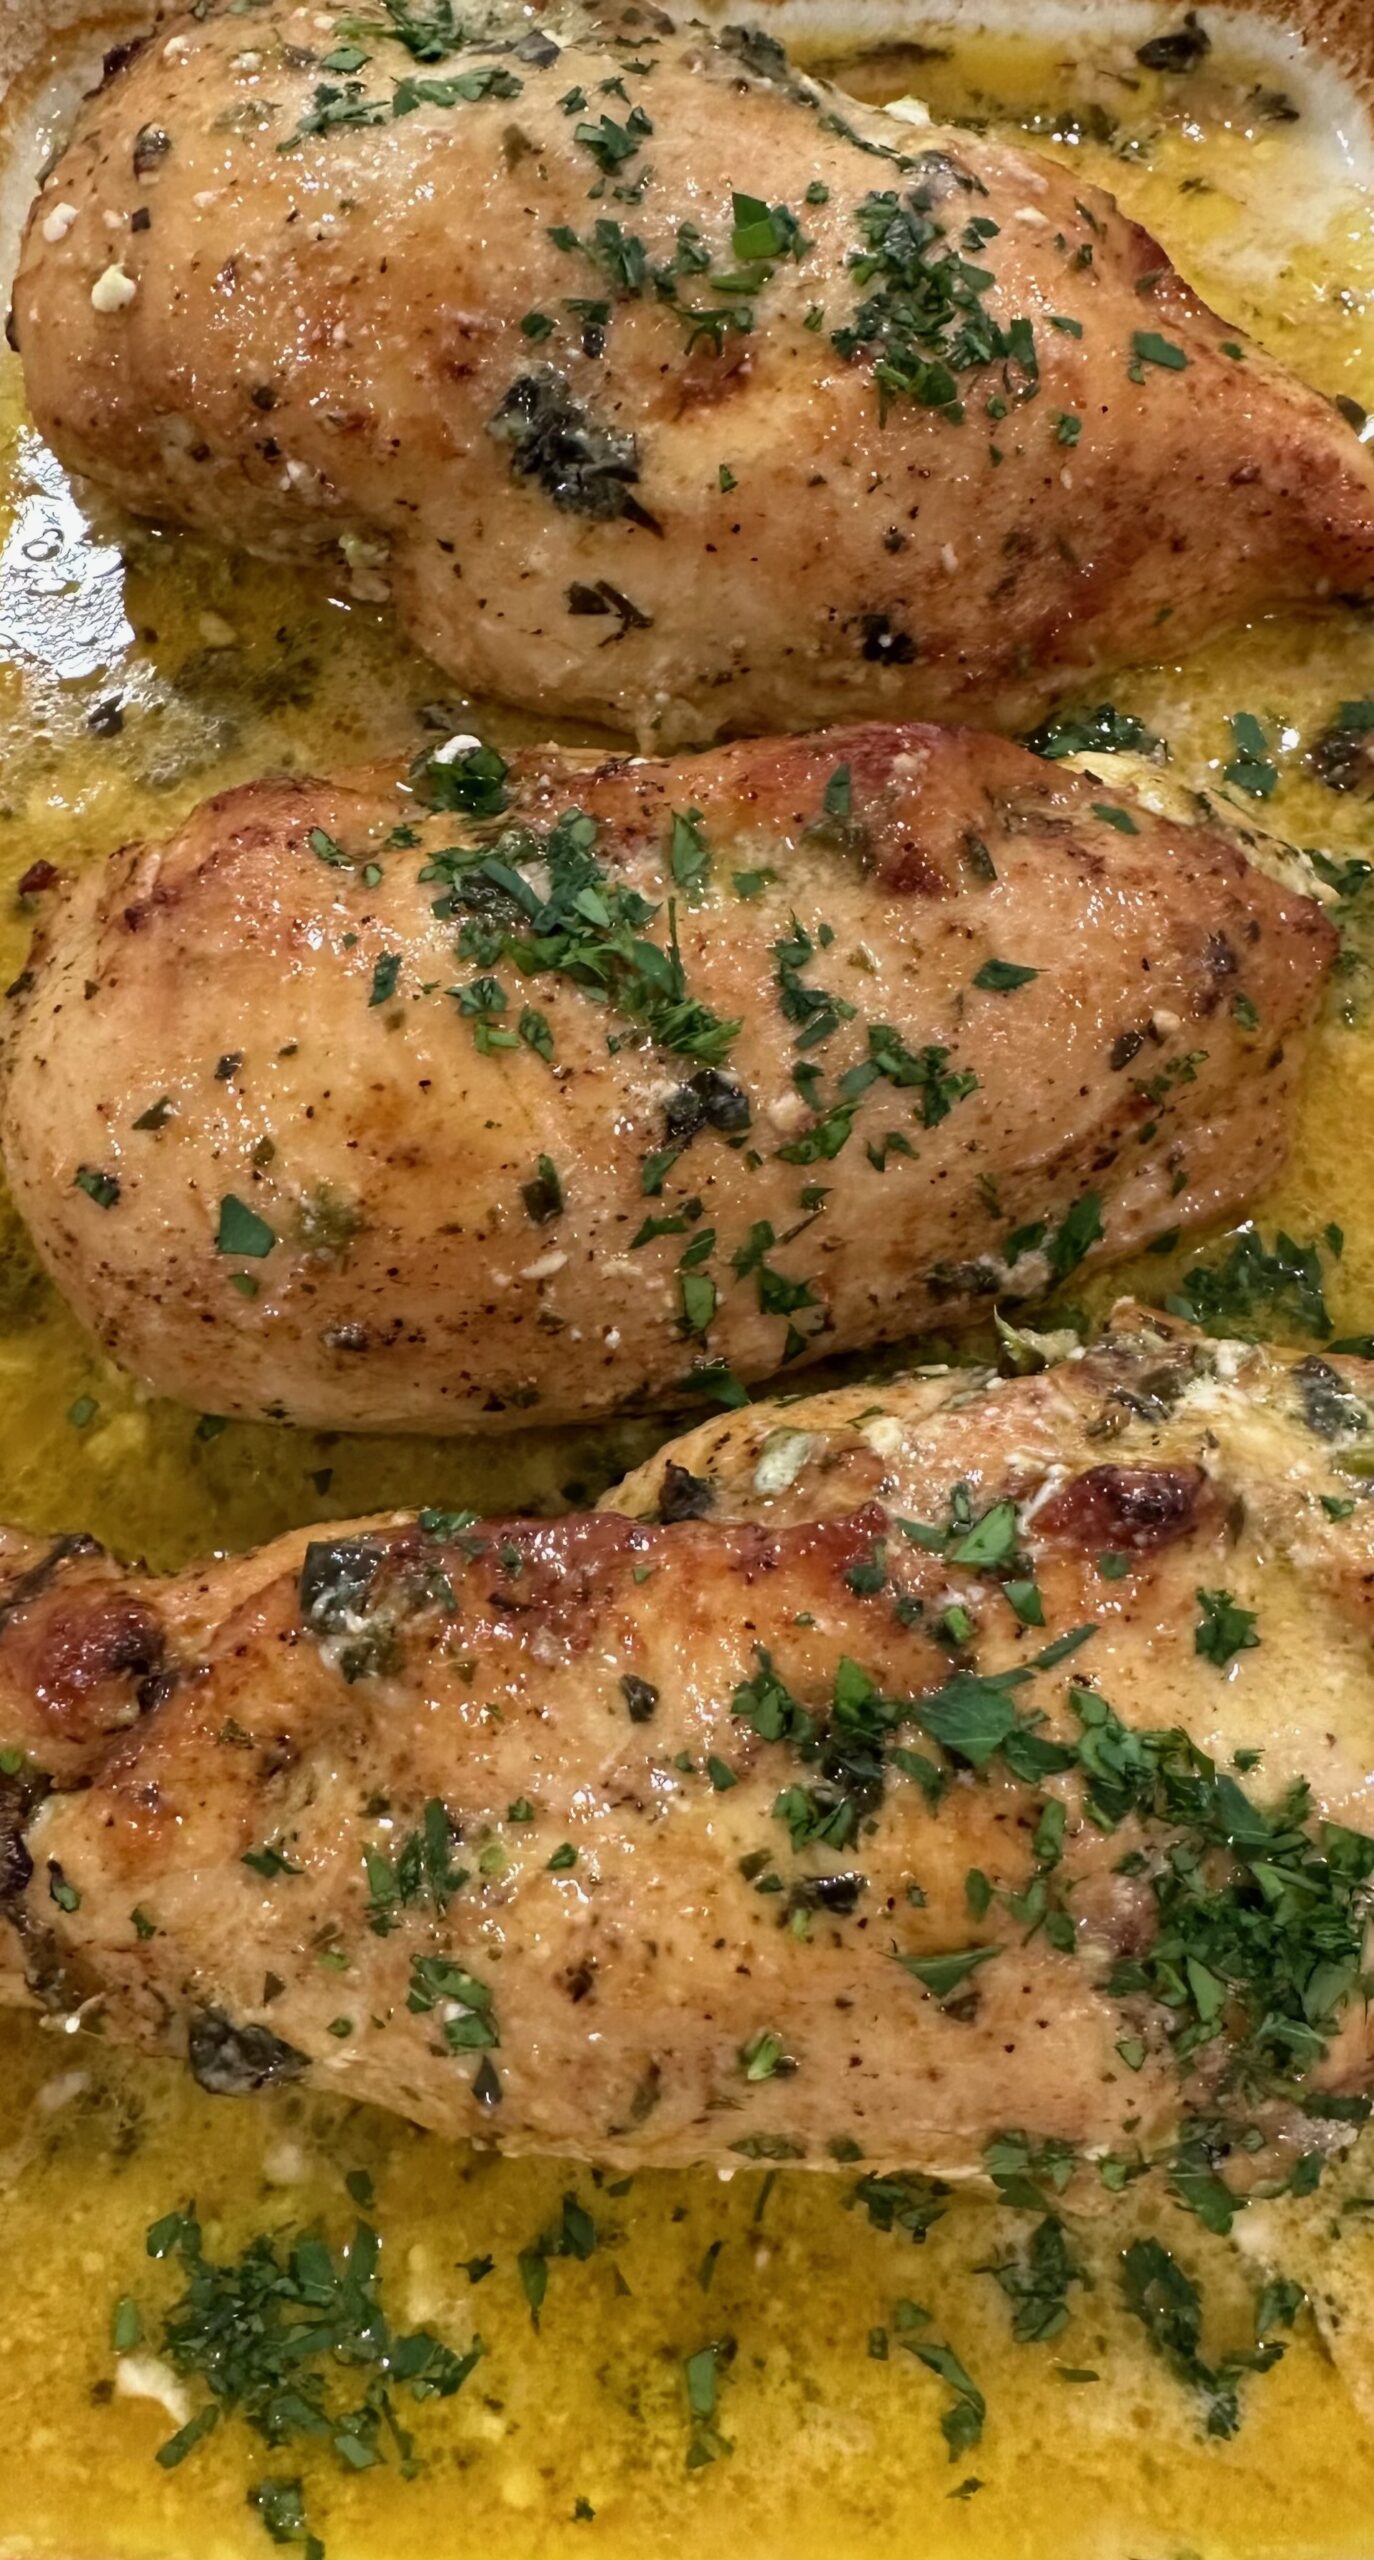 A close up of some chicken with herbs on top